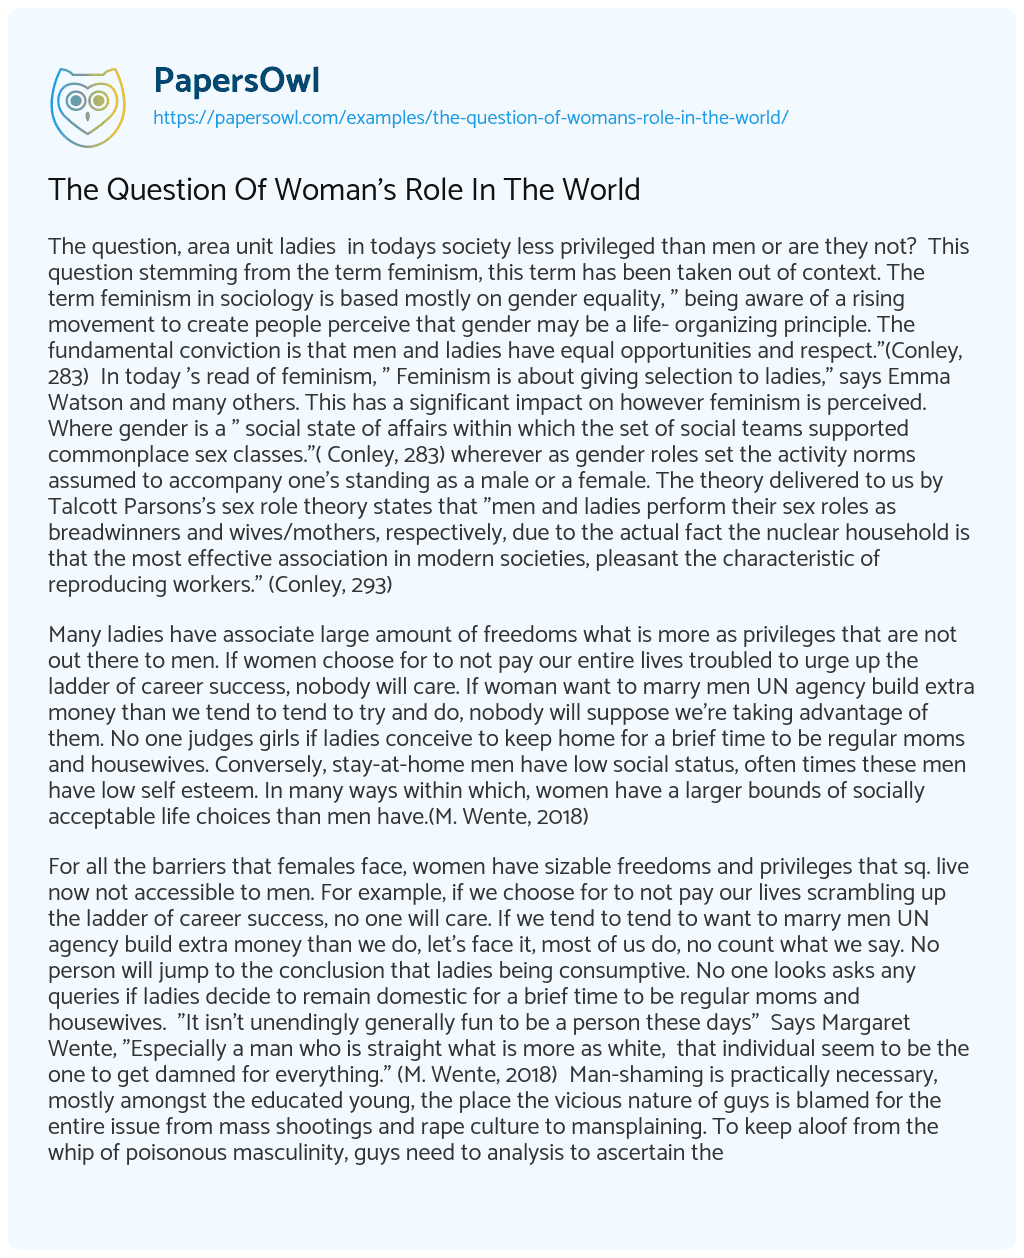 Essay on The Question of Woman’s Role in the World